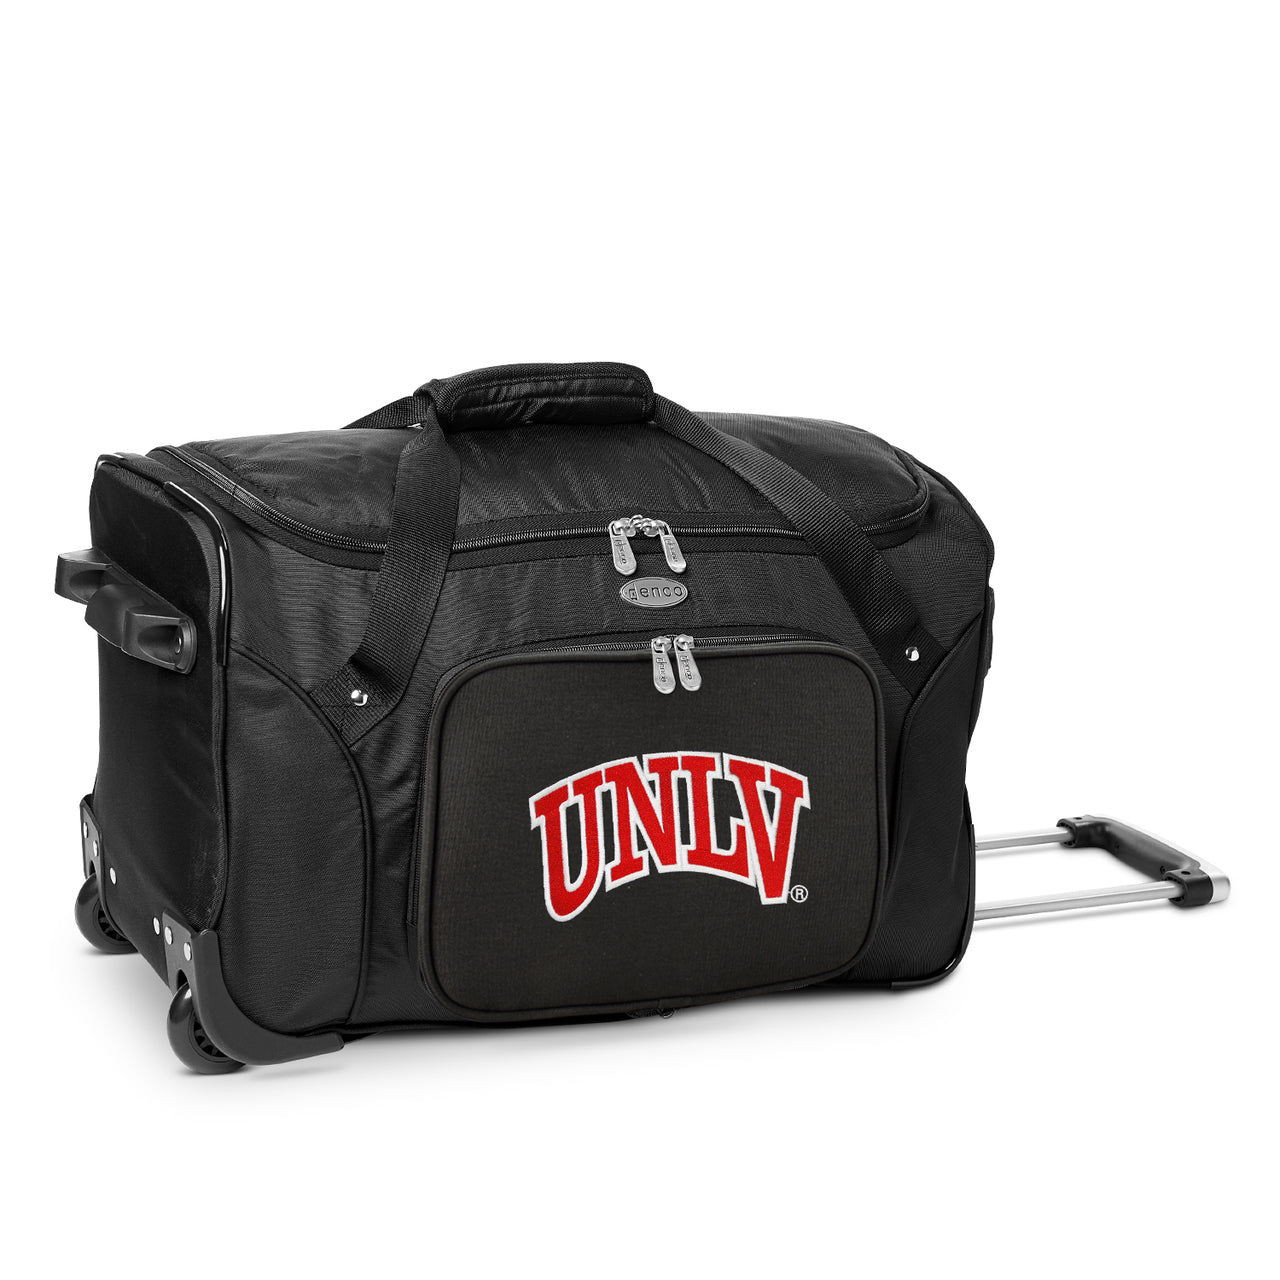 UNLV Rebels Luggage | UNLV Rebels Wheeled Carry On Luggage